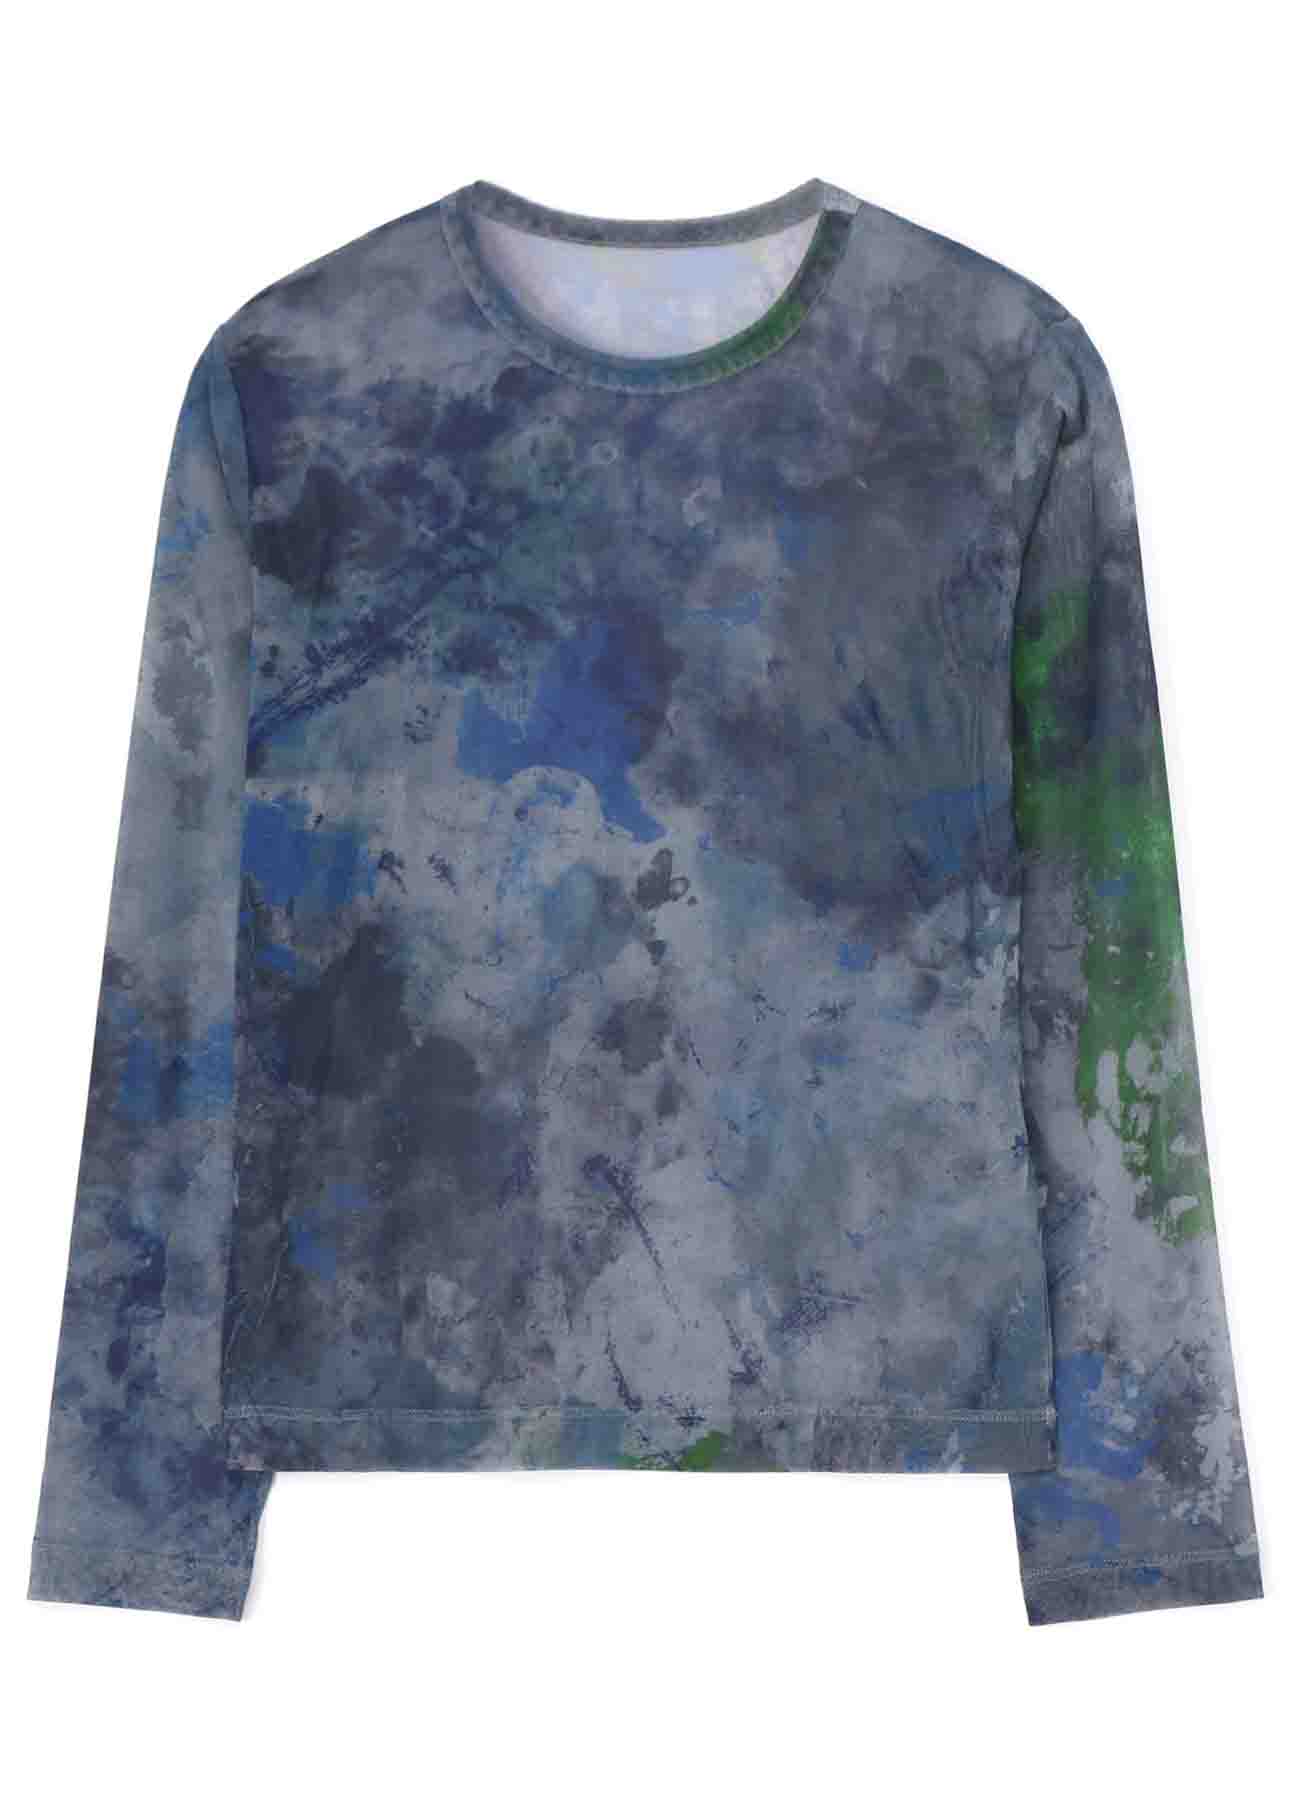 PE TULLE PAINT DESIGN ROUND NECK LONG SLEEVE T